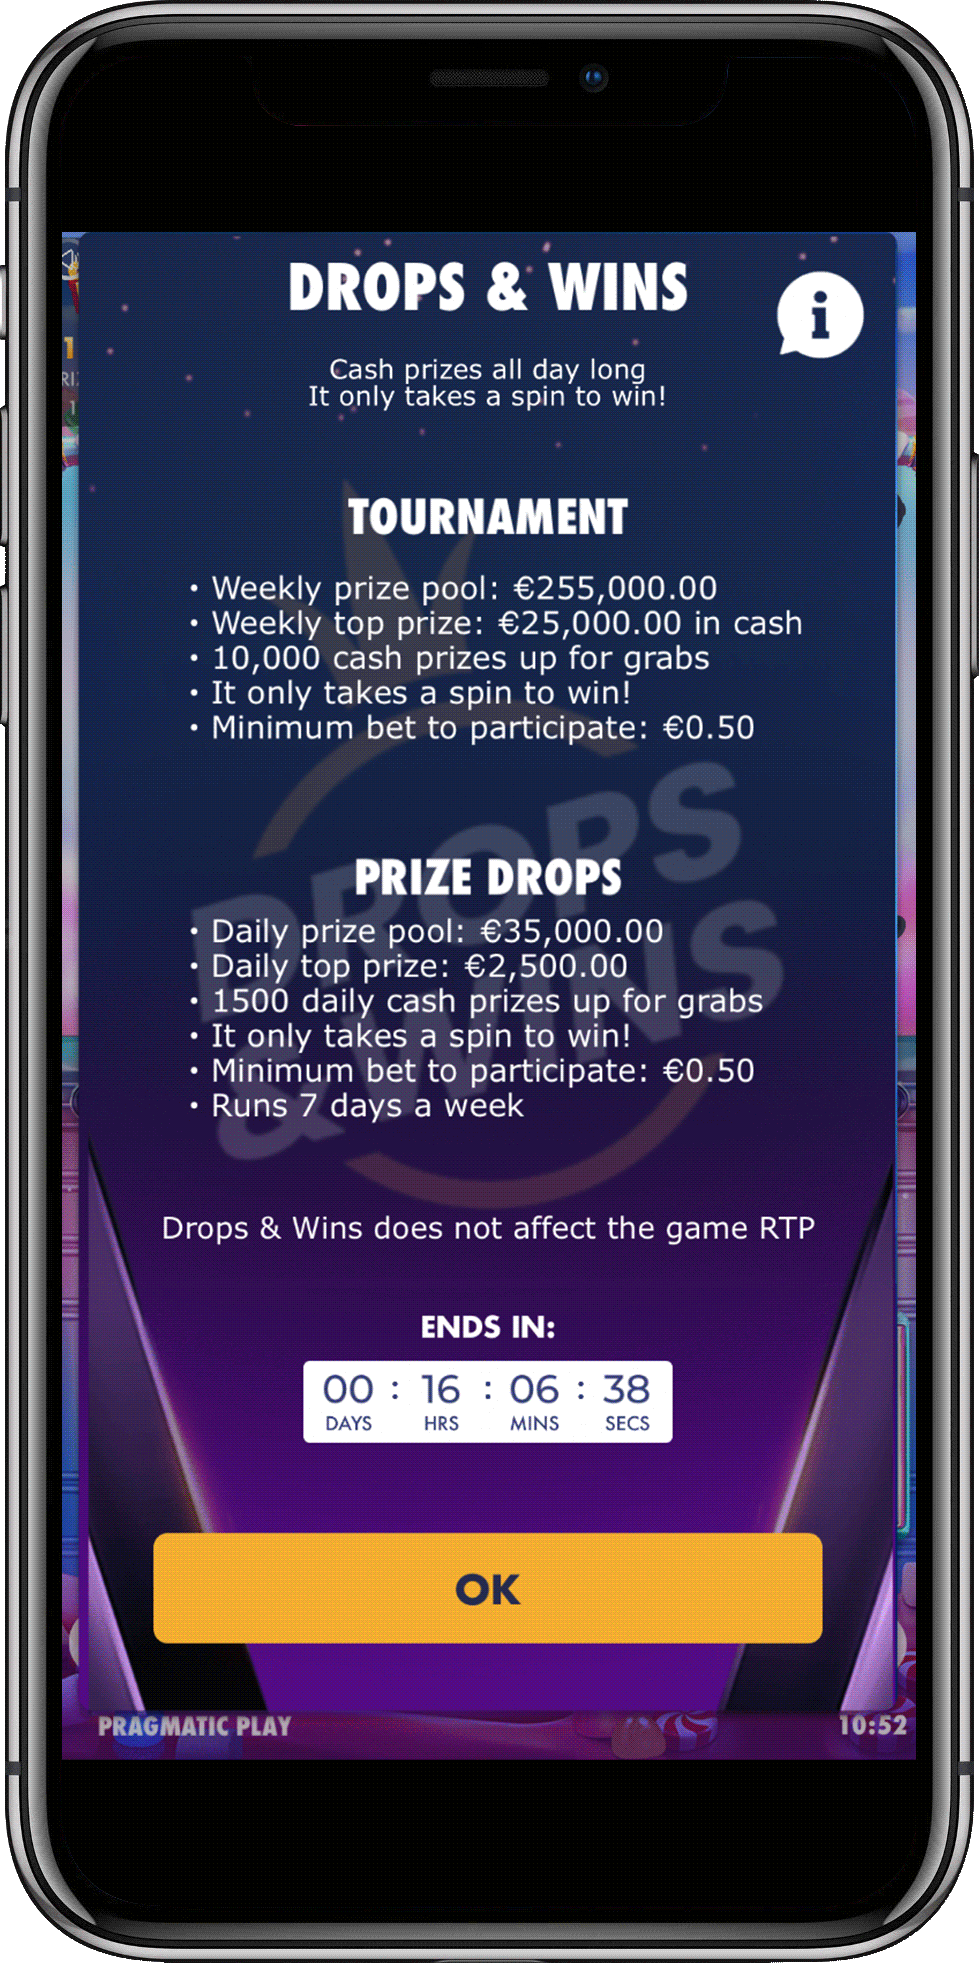 Smartphone displaying Drops & Wins tournament details